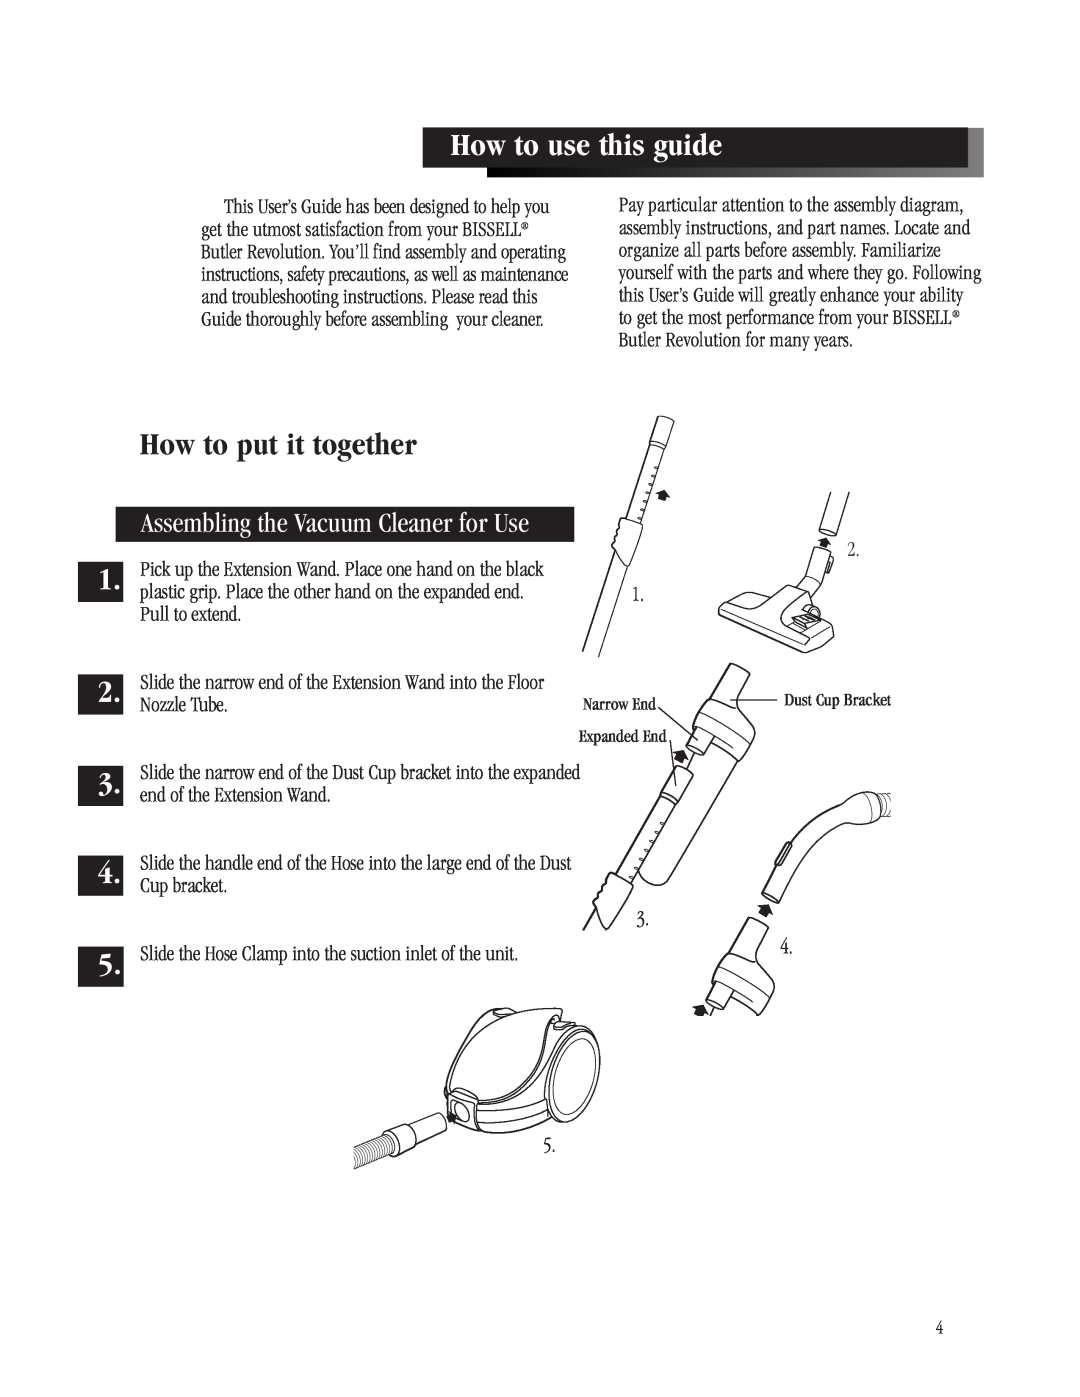 Bissell 6700-C How to use this guide, How to put it together, Assembling the Vacuum Cleaner for Use, Pull to extend 